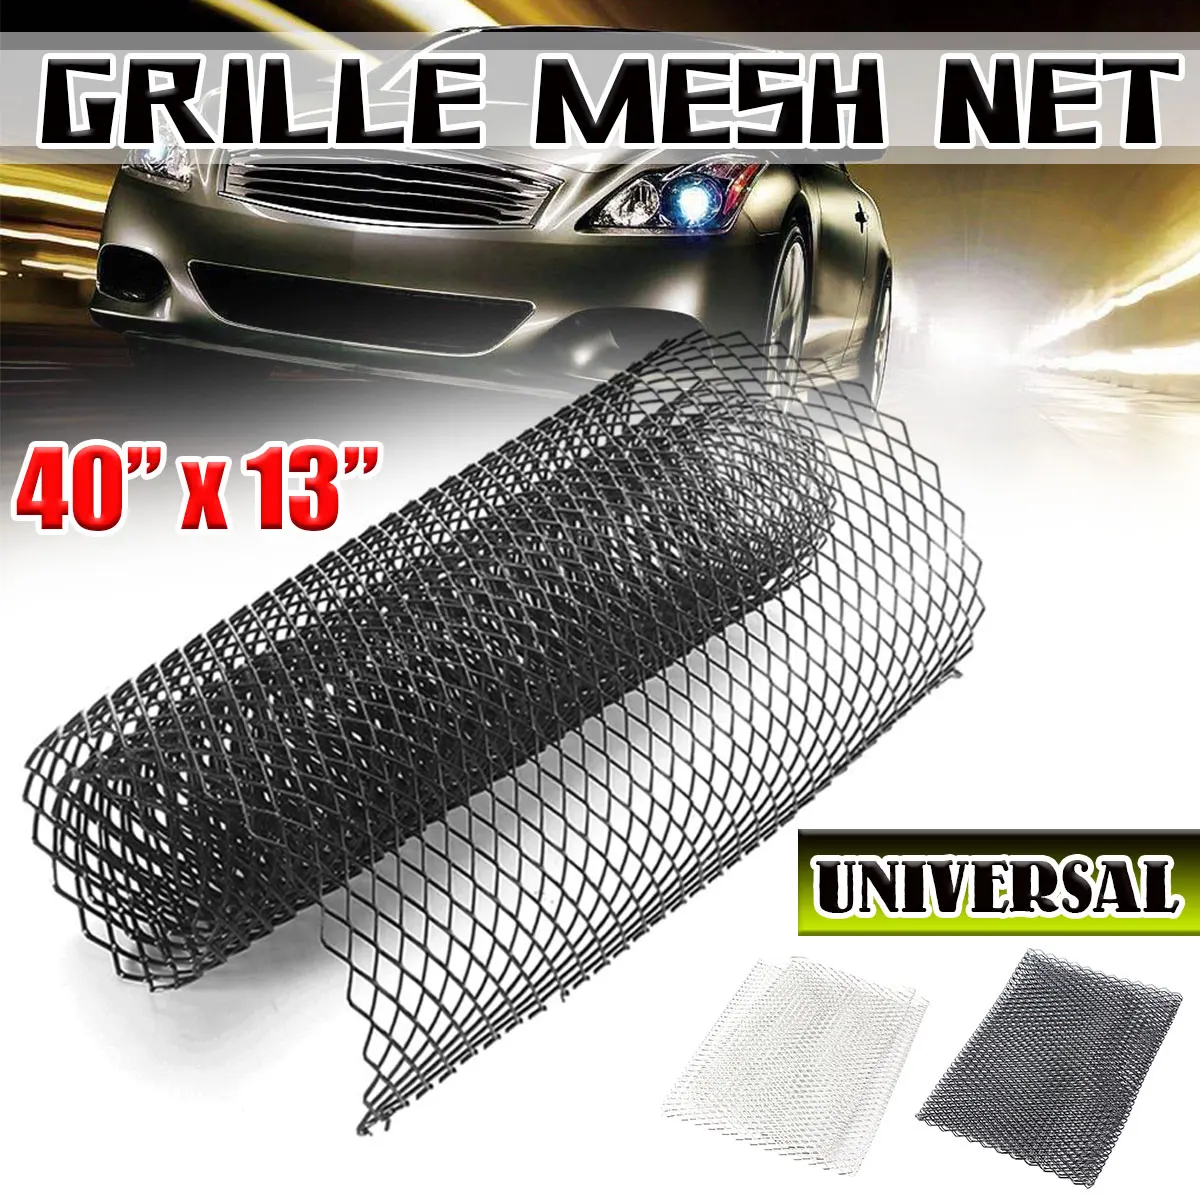 

Universal 100cx33cm Aluminium Racing Car Front Grille Grill Mesh Vent Tuning Styling Grille Net Mesh Section Mesh Grille Grill